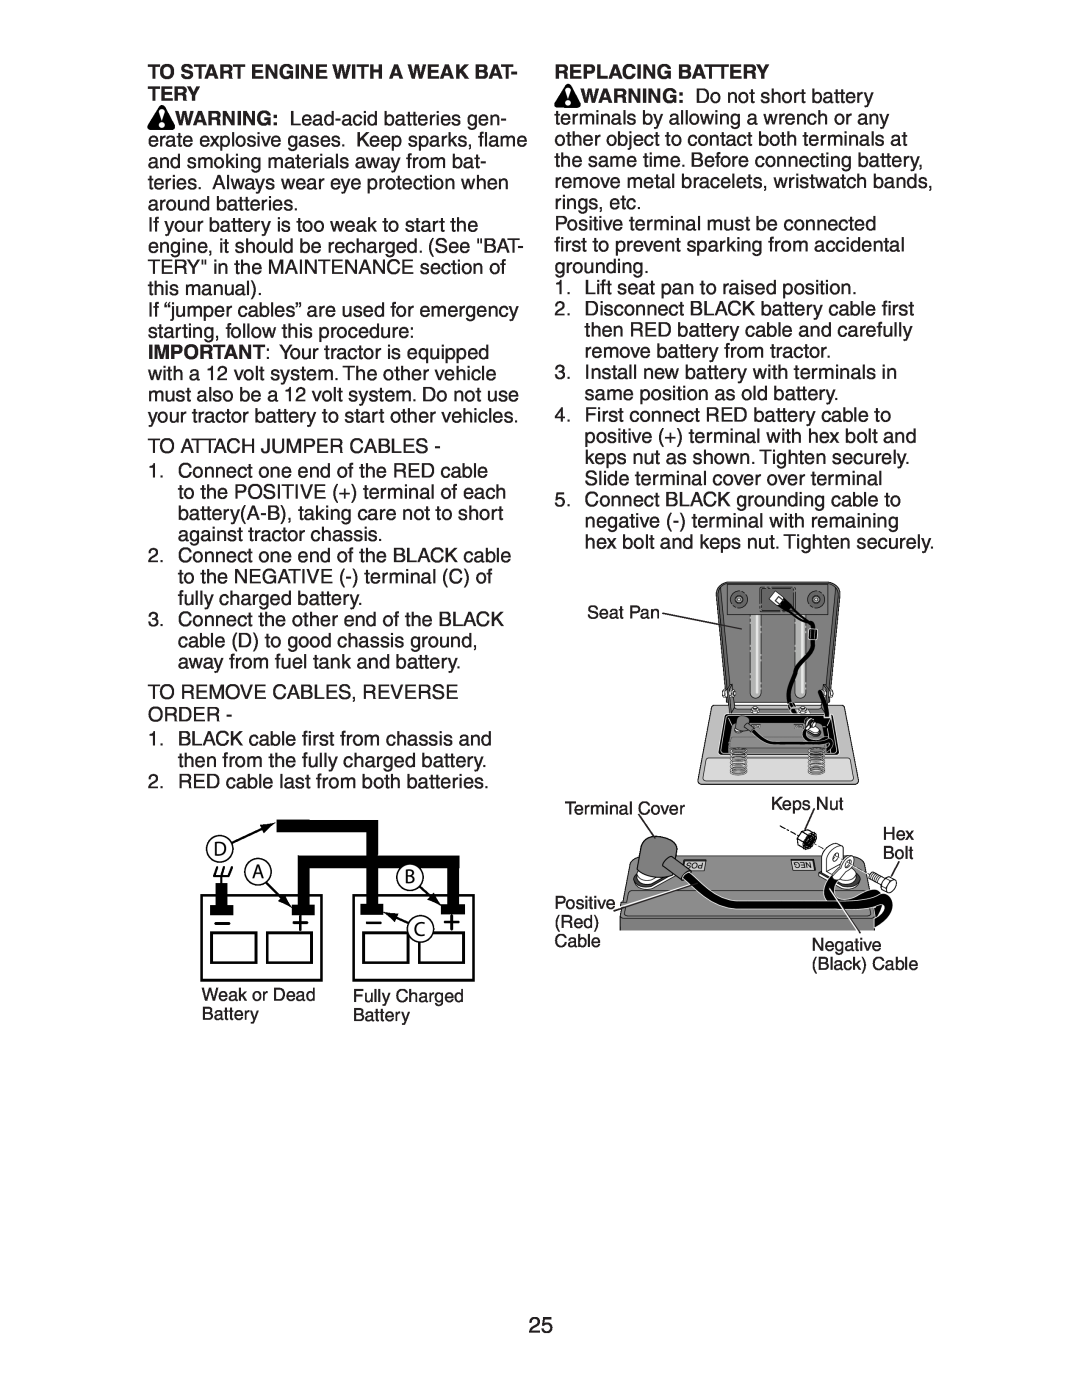 Electrolux AG15538B manual To Start Engine With A Weak Bat- Tery, Replacing Battery 